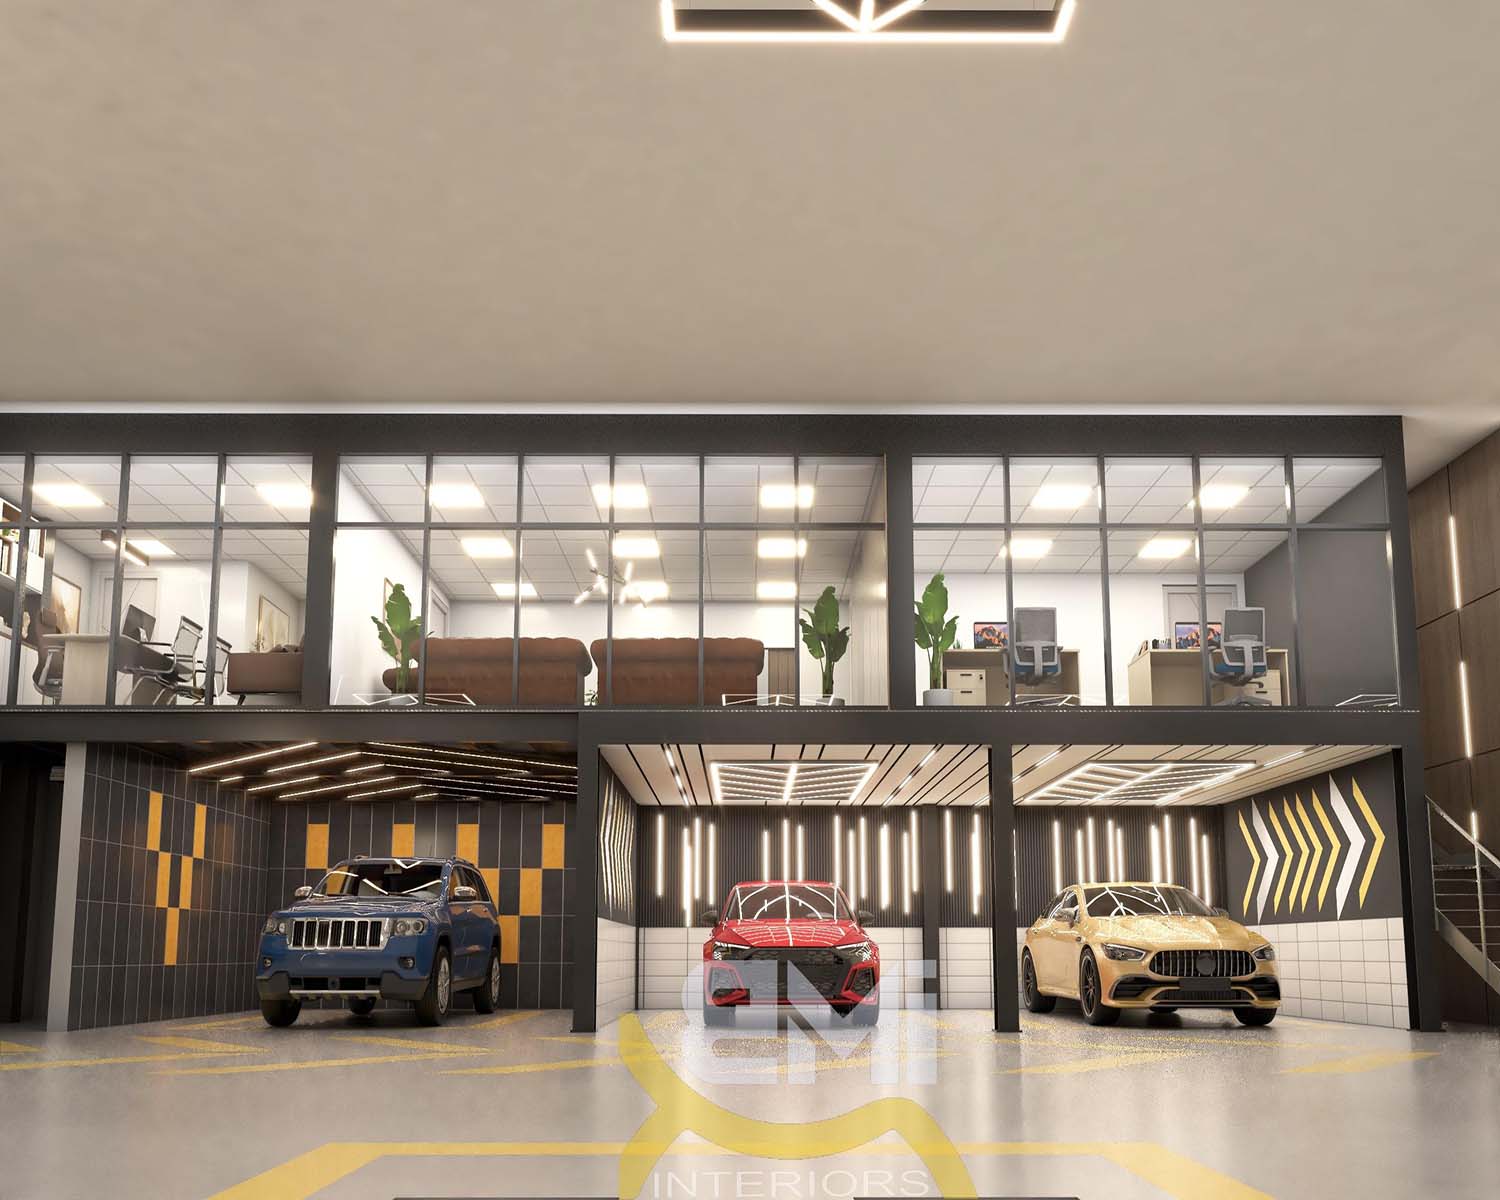 luxury car showroom interior design with glass partiton, 3 luxury cars parked in it